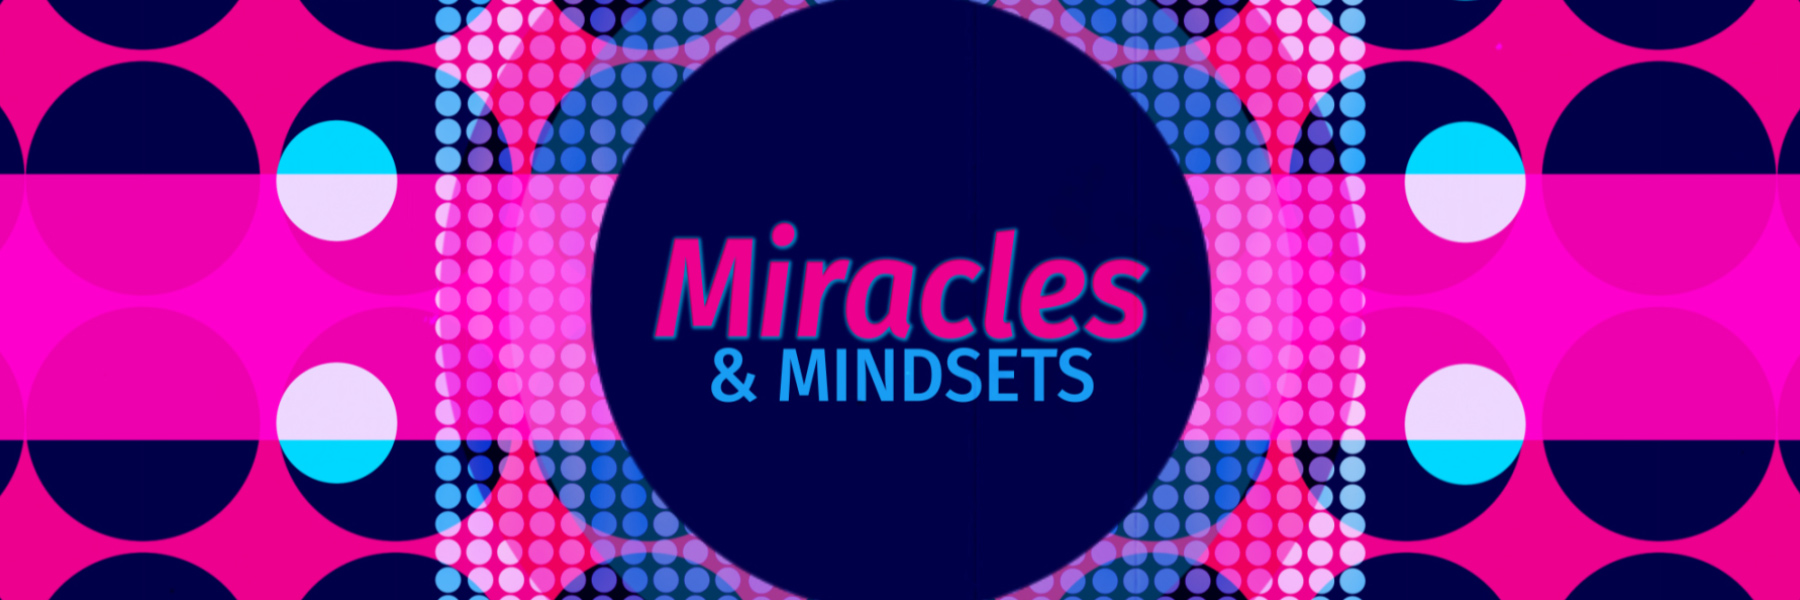 Miracles and Mindsets